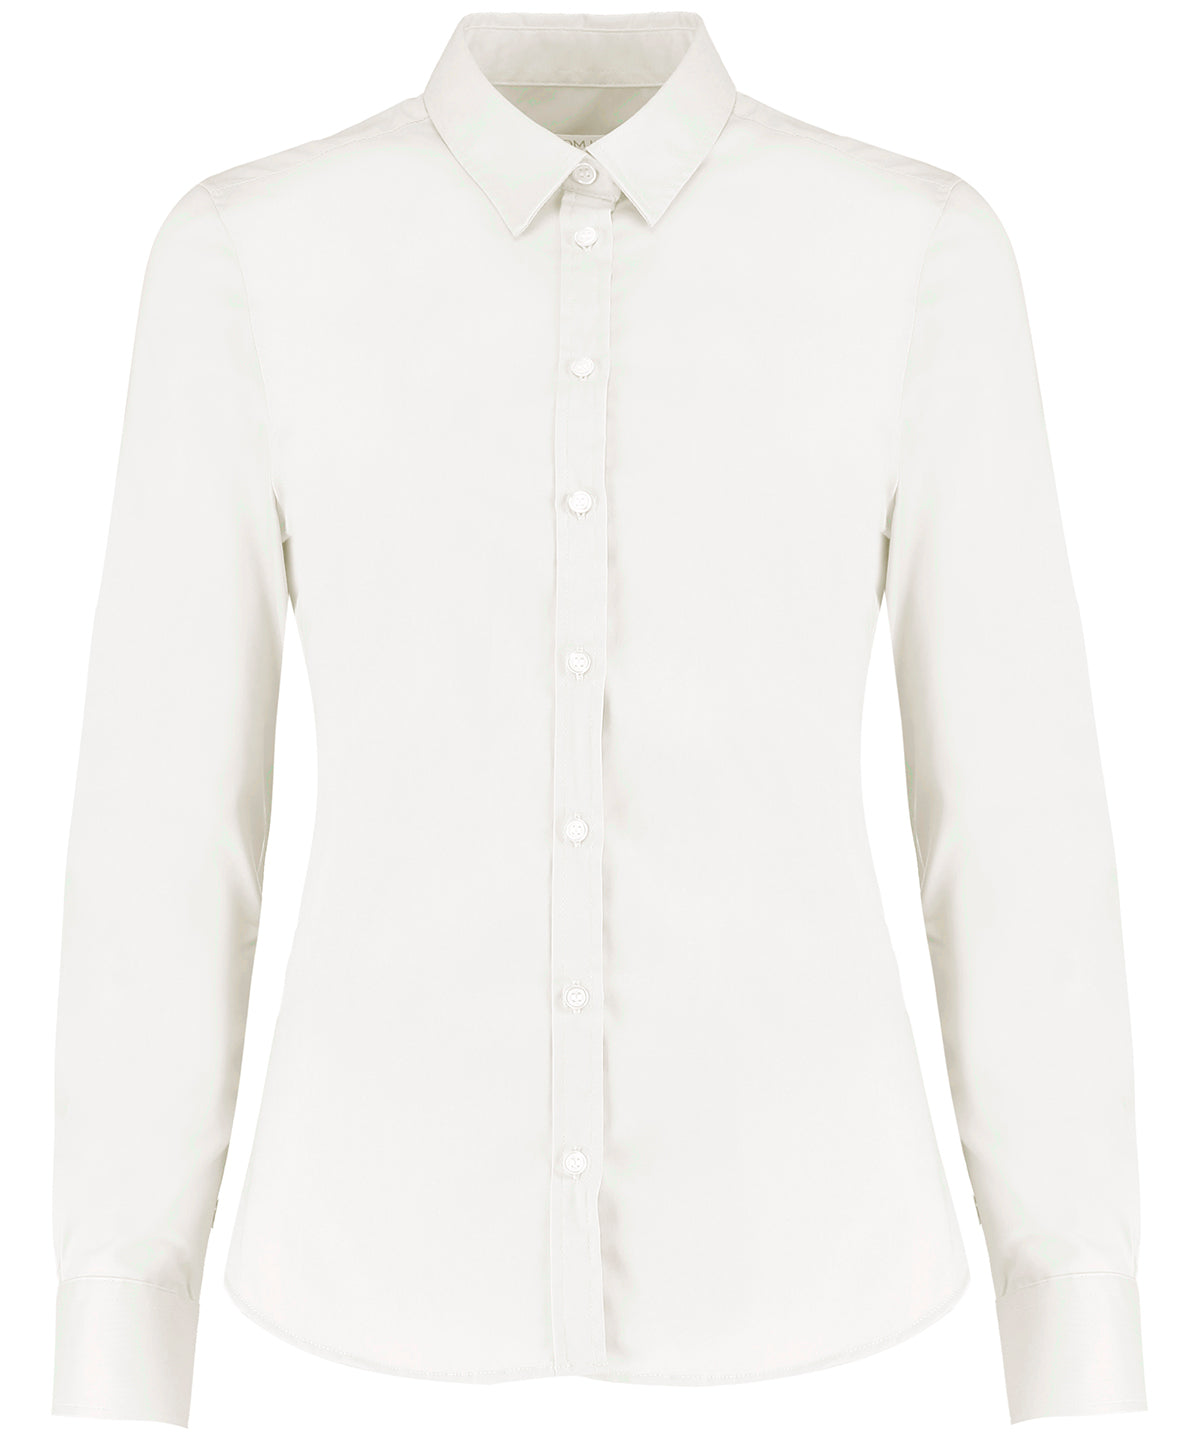 Bolir - Women's Stretch Oxford Shirt Long-sleeved (tailored Fit)